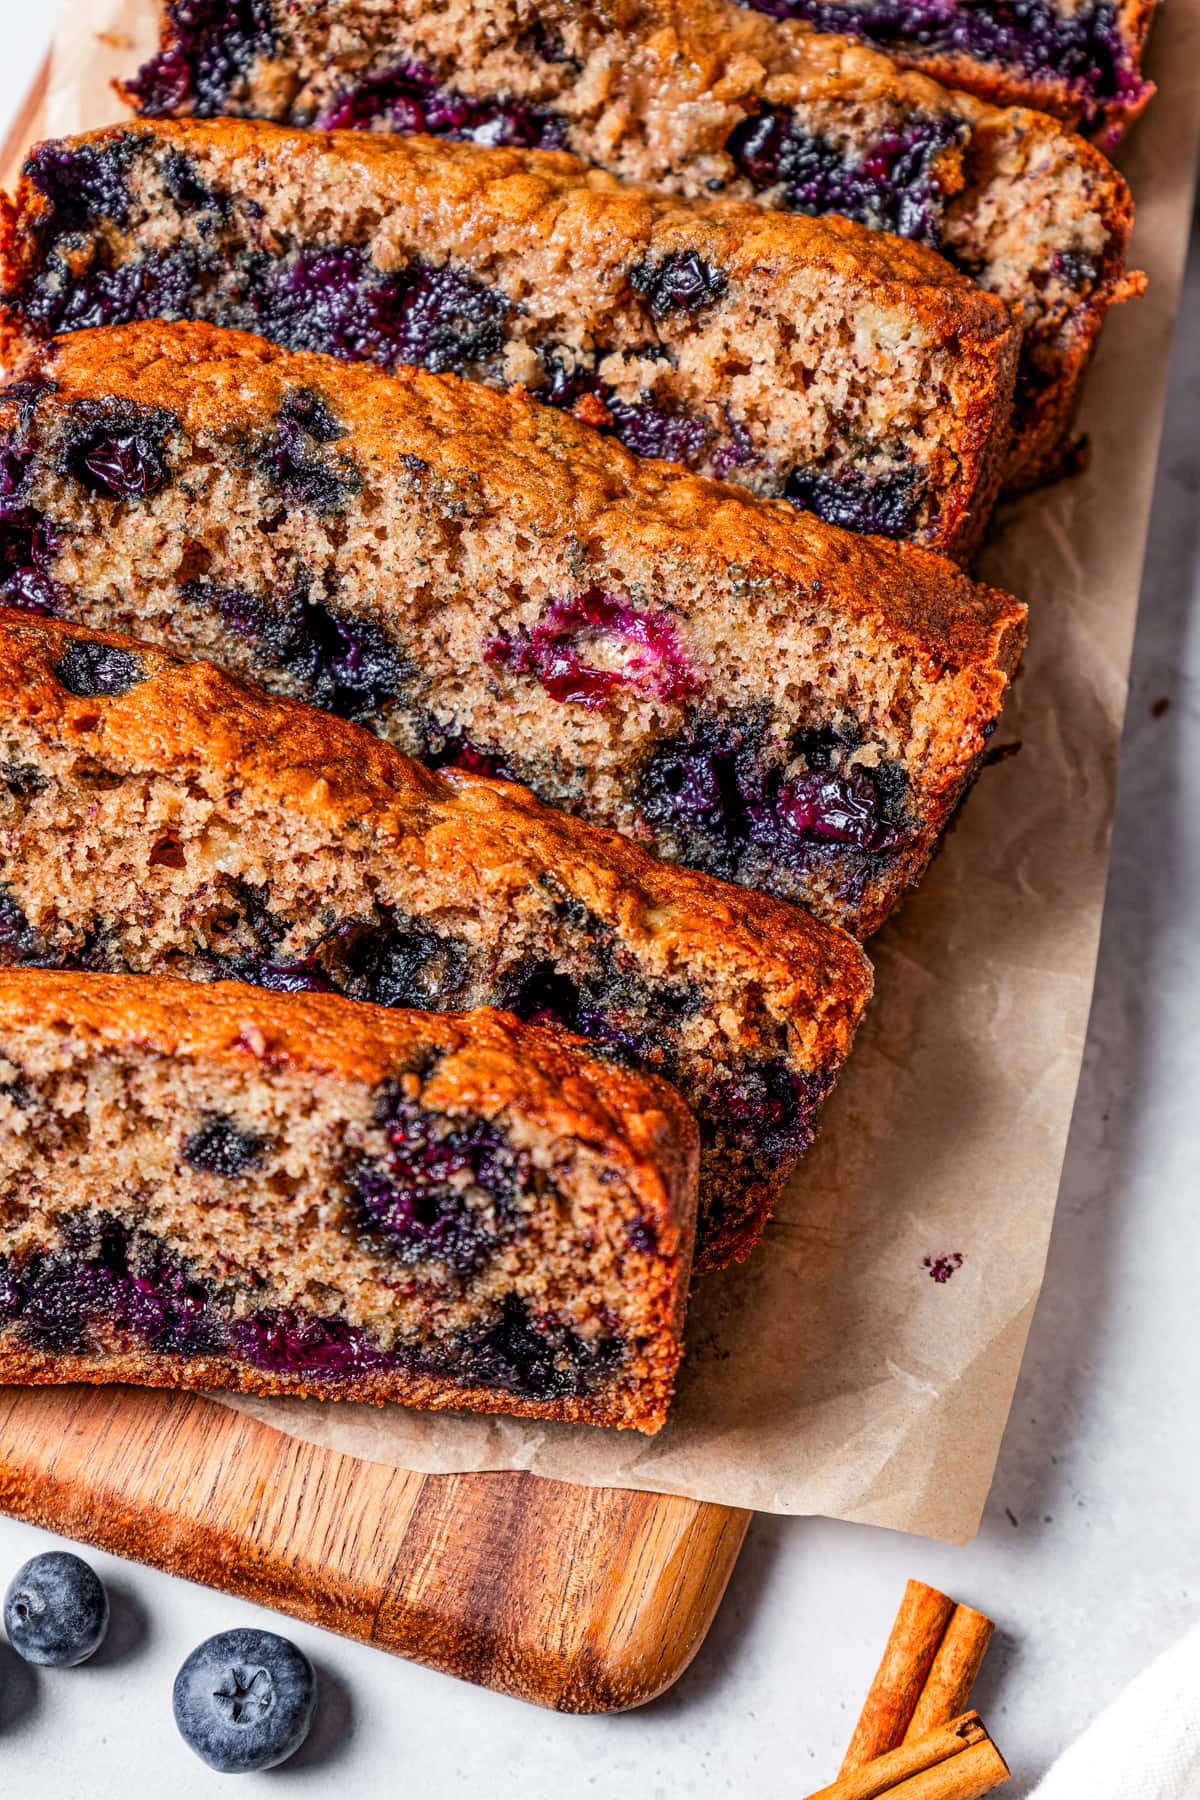 Close-up view of a loaf of blueberry banana bread cut into slices.